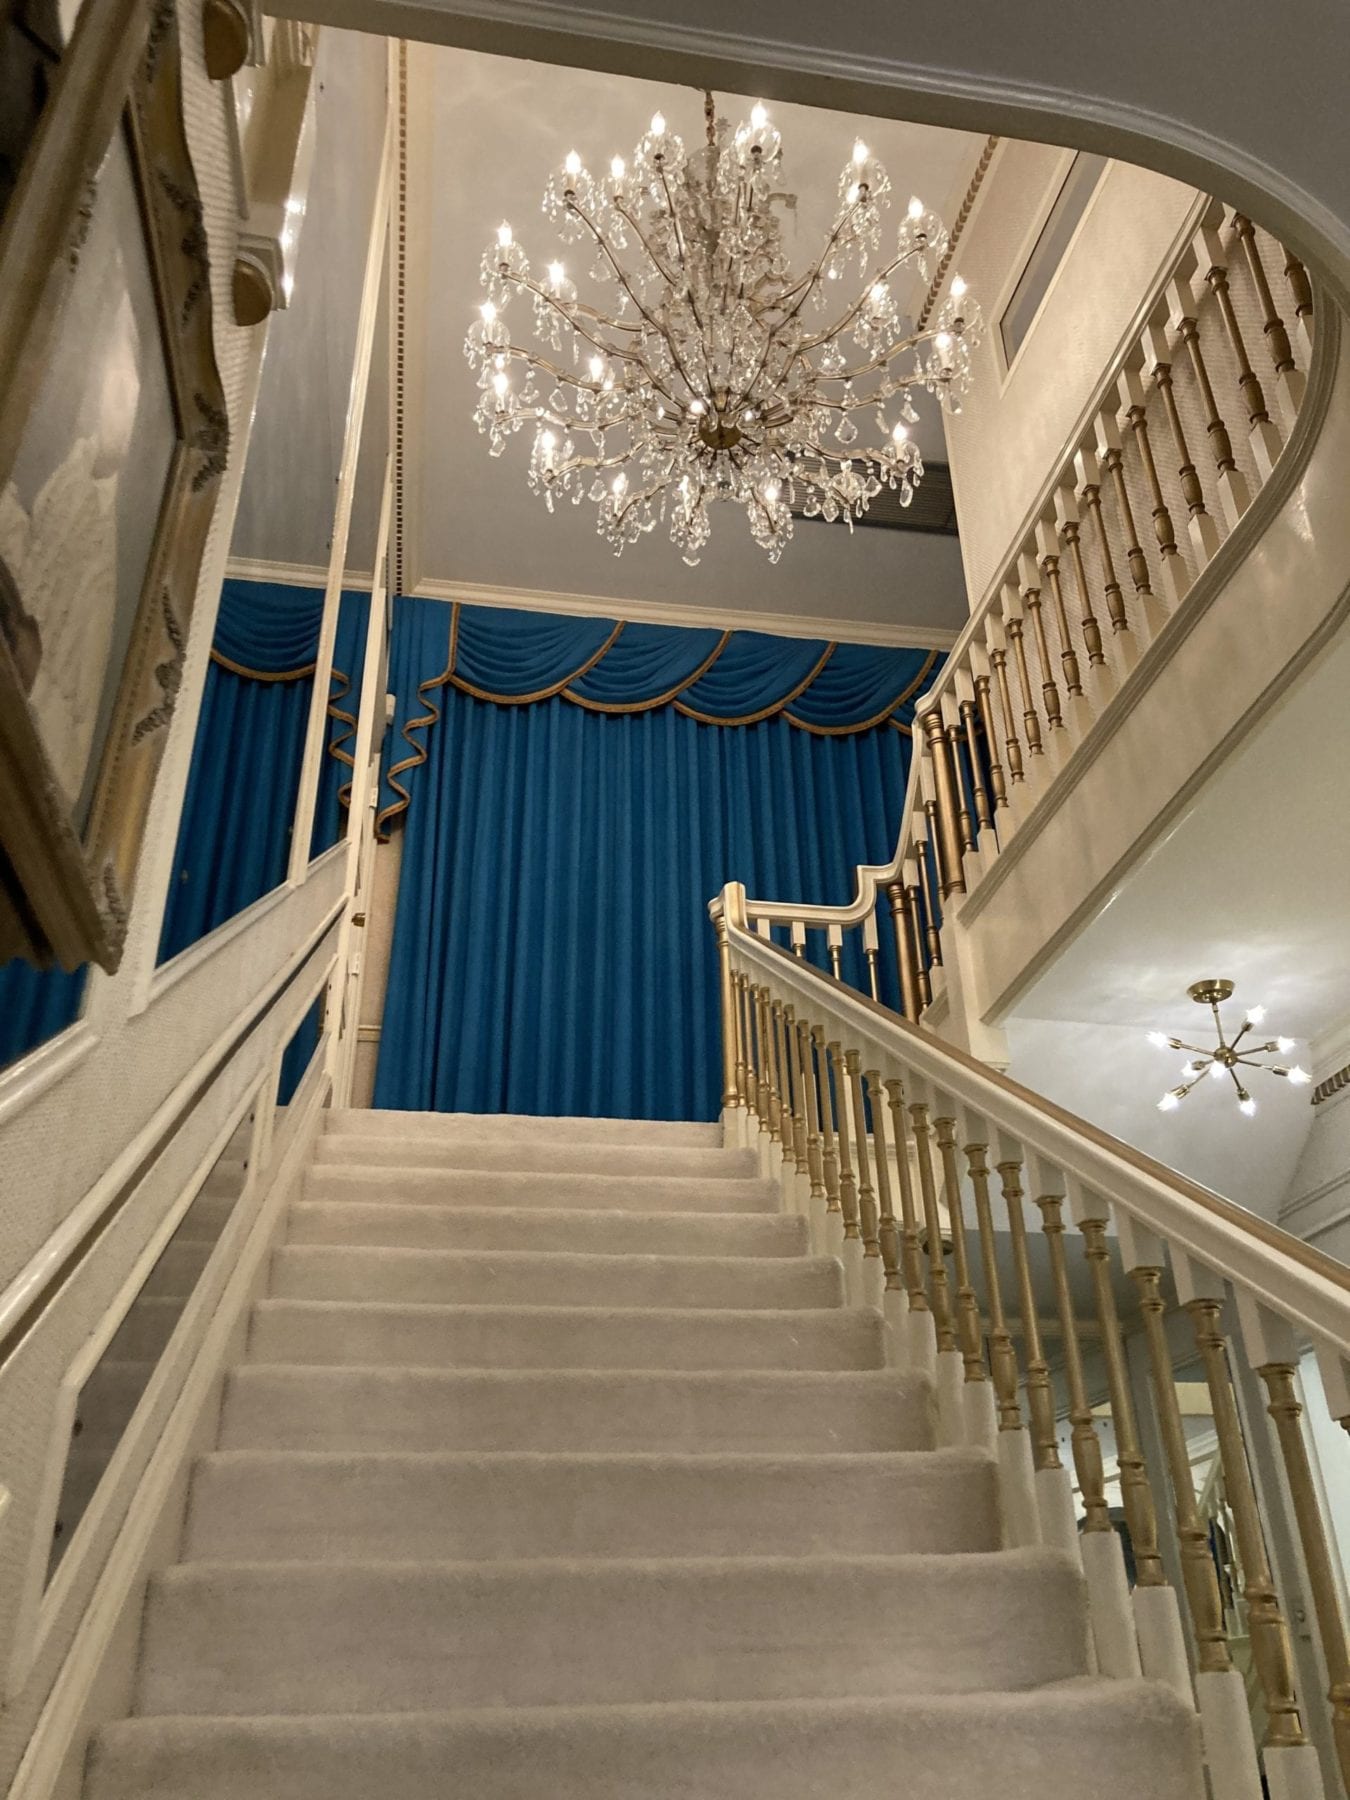 Staircase at Graceland